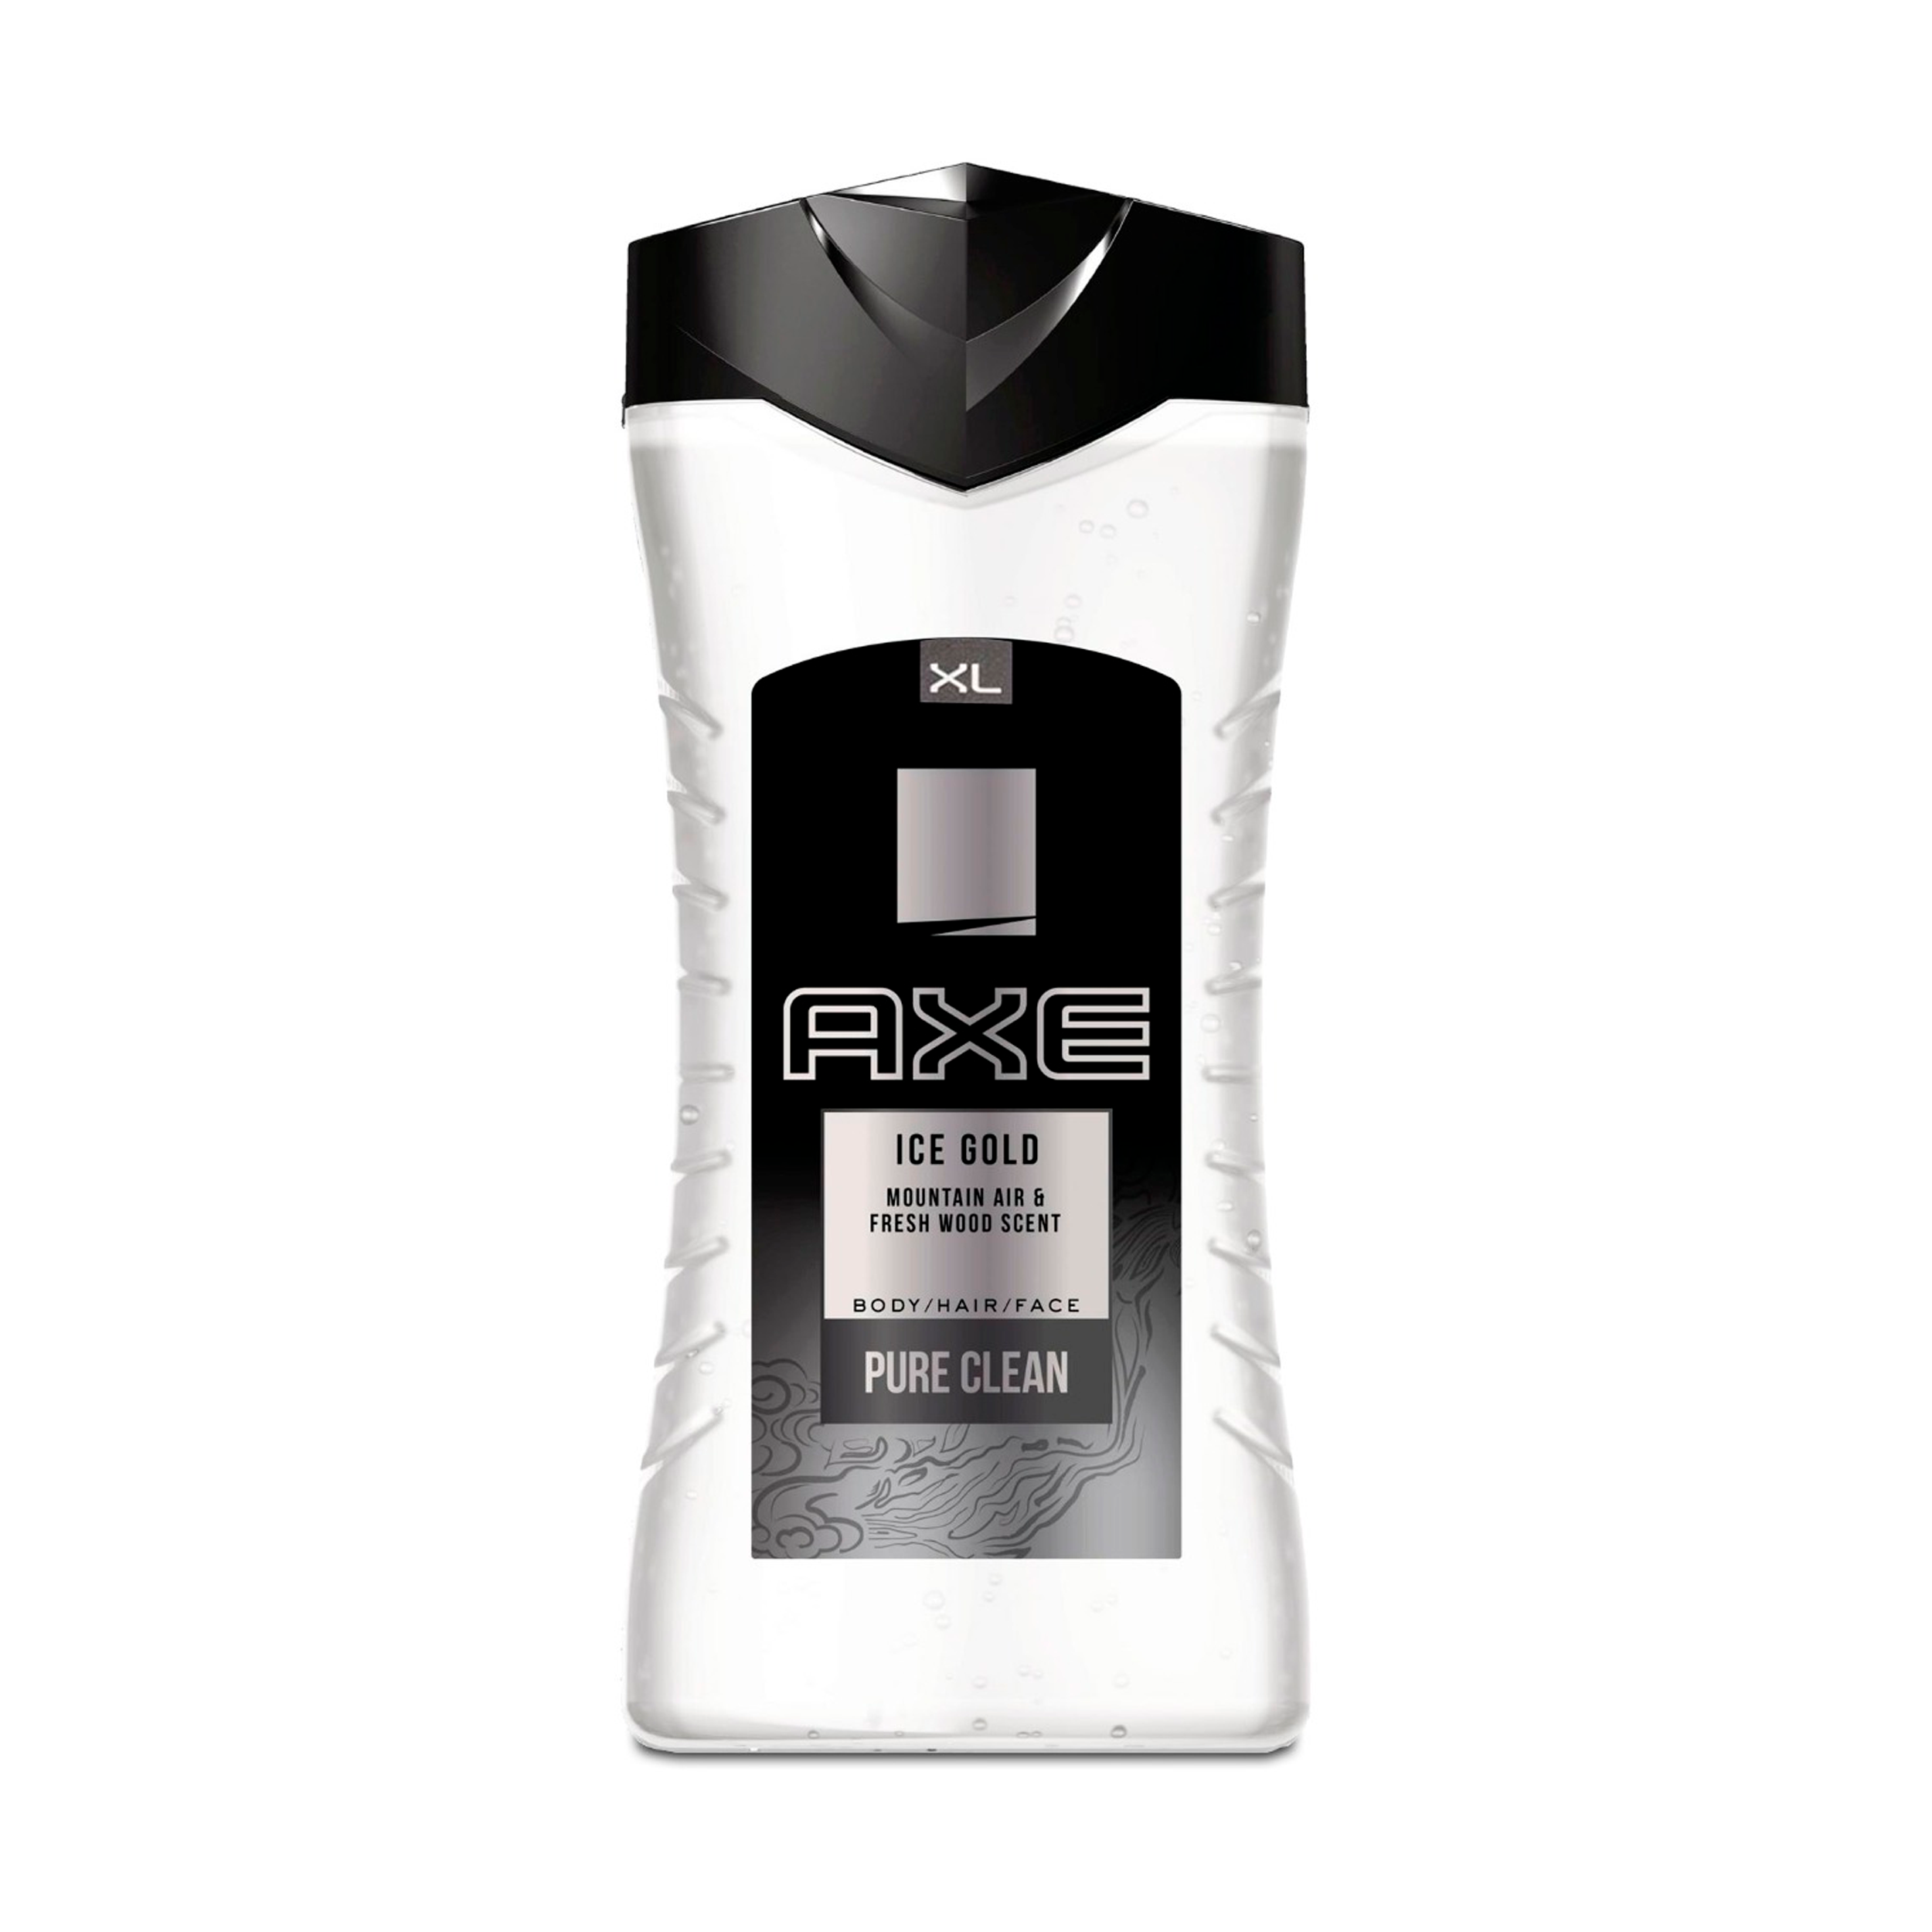 AXE ICE GOLD, PURE CLEAN, BODY/ HAIR/ FACE –